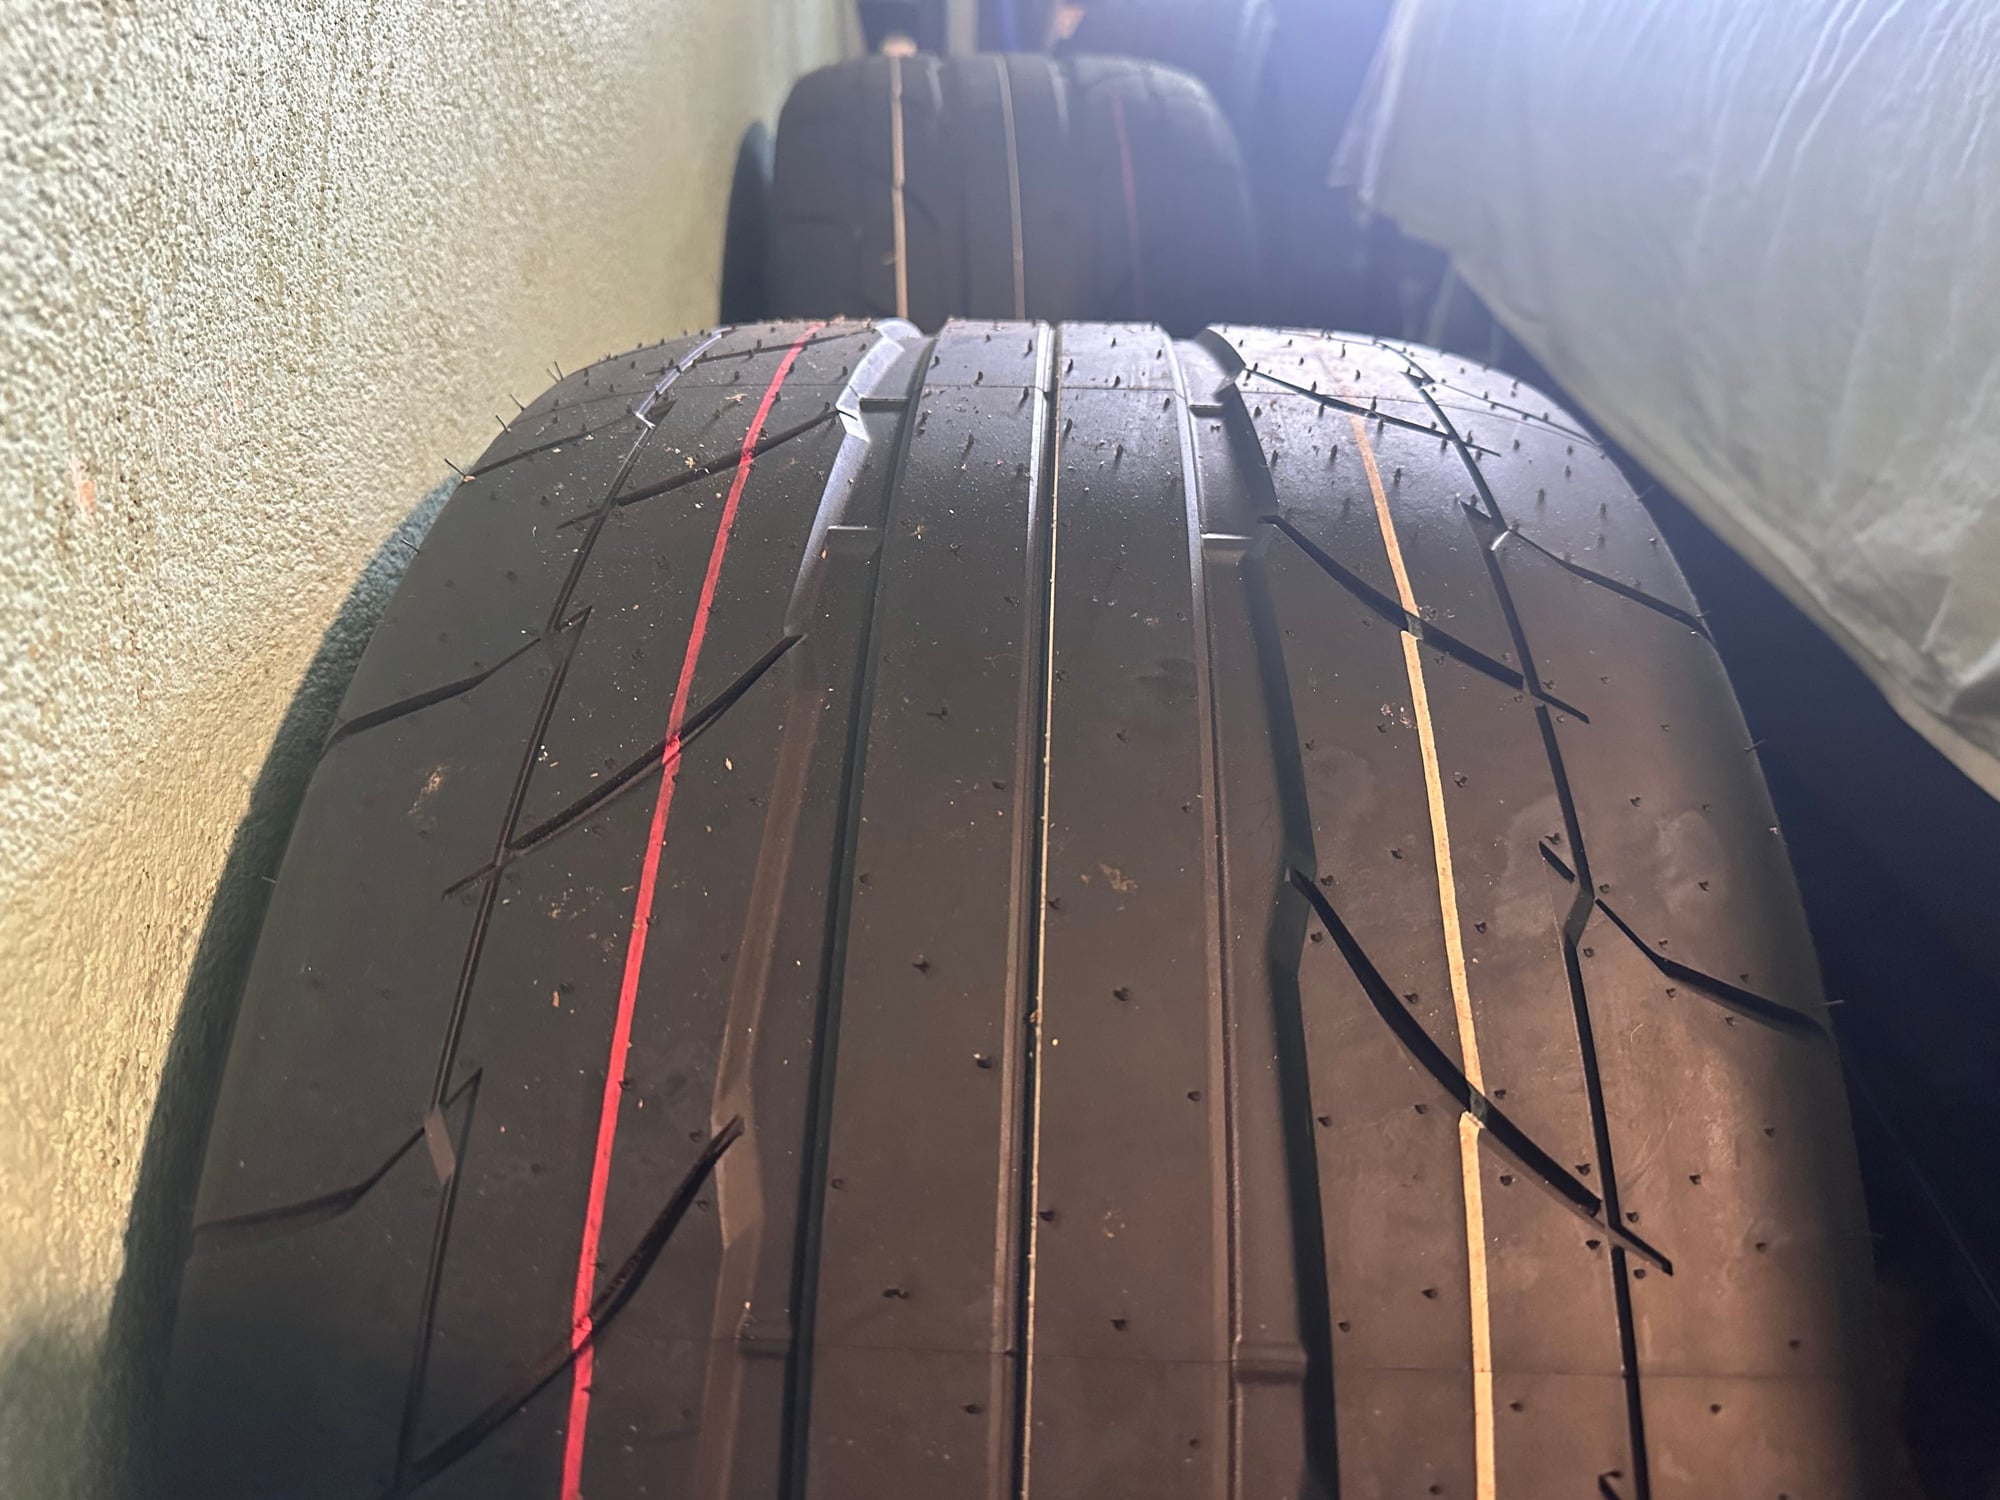 FS (For Sale) New Drag Radials Nitto NT555r2 305/35r19